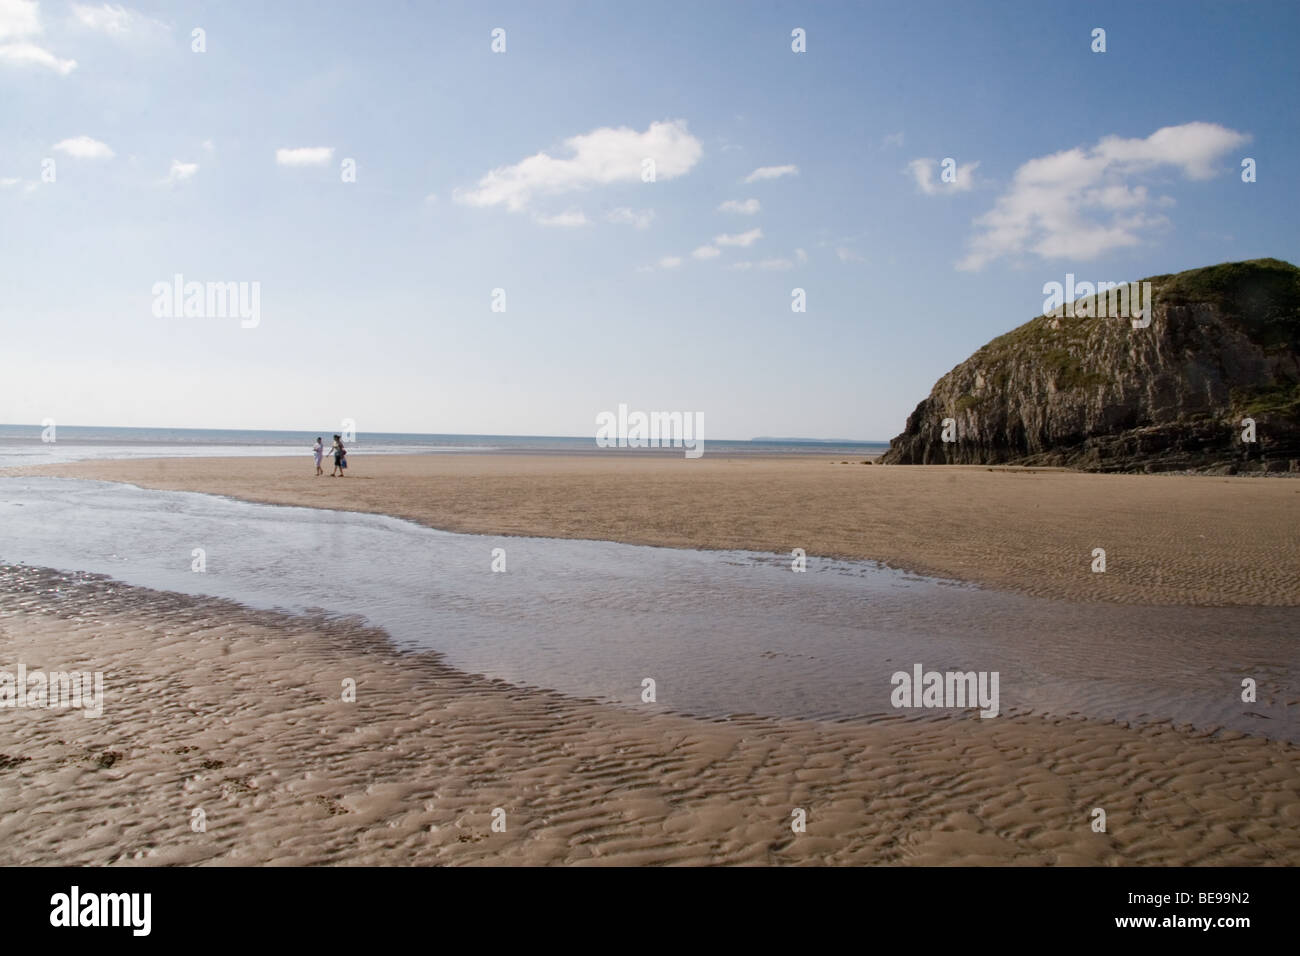 2 people walk alone on the beach at Pendine, Wales, UK Stock Photo